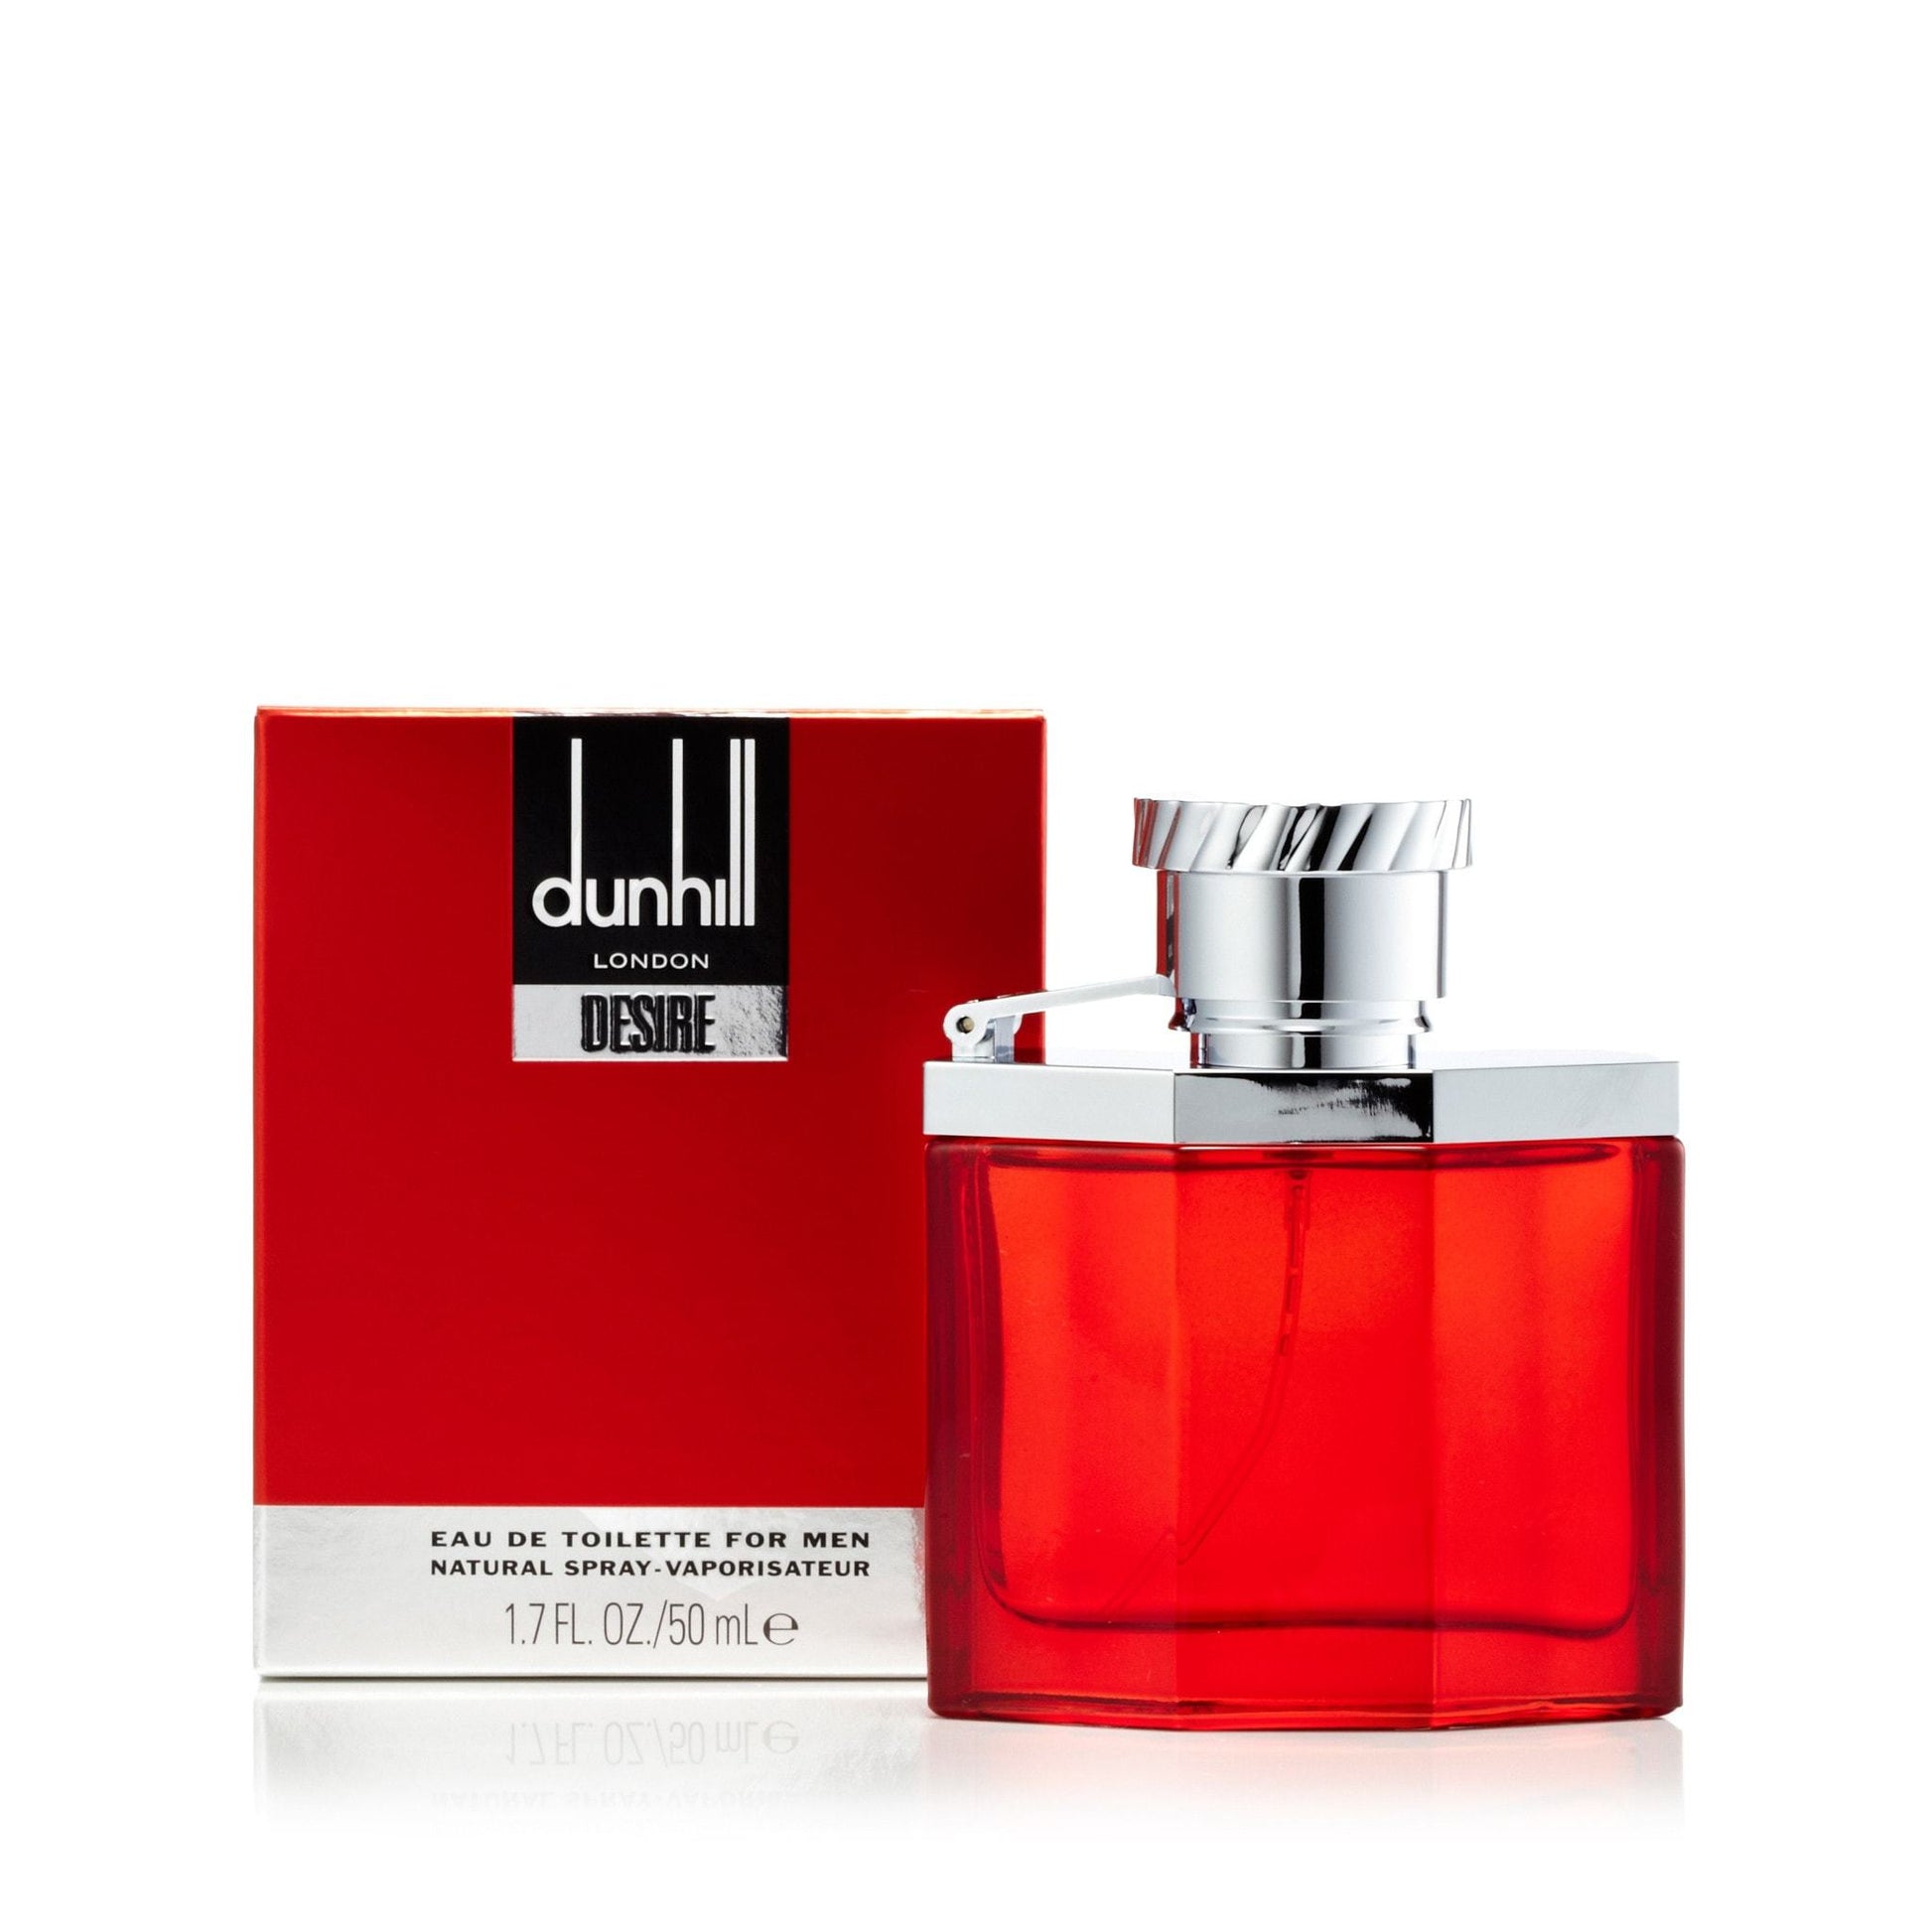 Desire Red Eau de Toilette Spray for Men by Alfred Dunhill, Product image 4